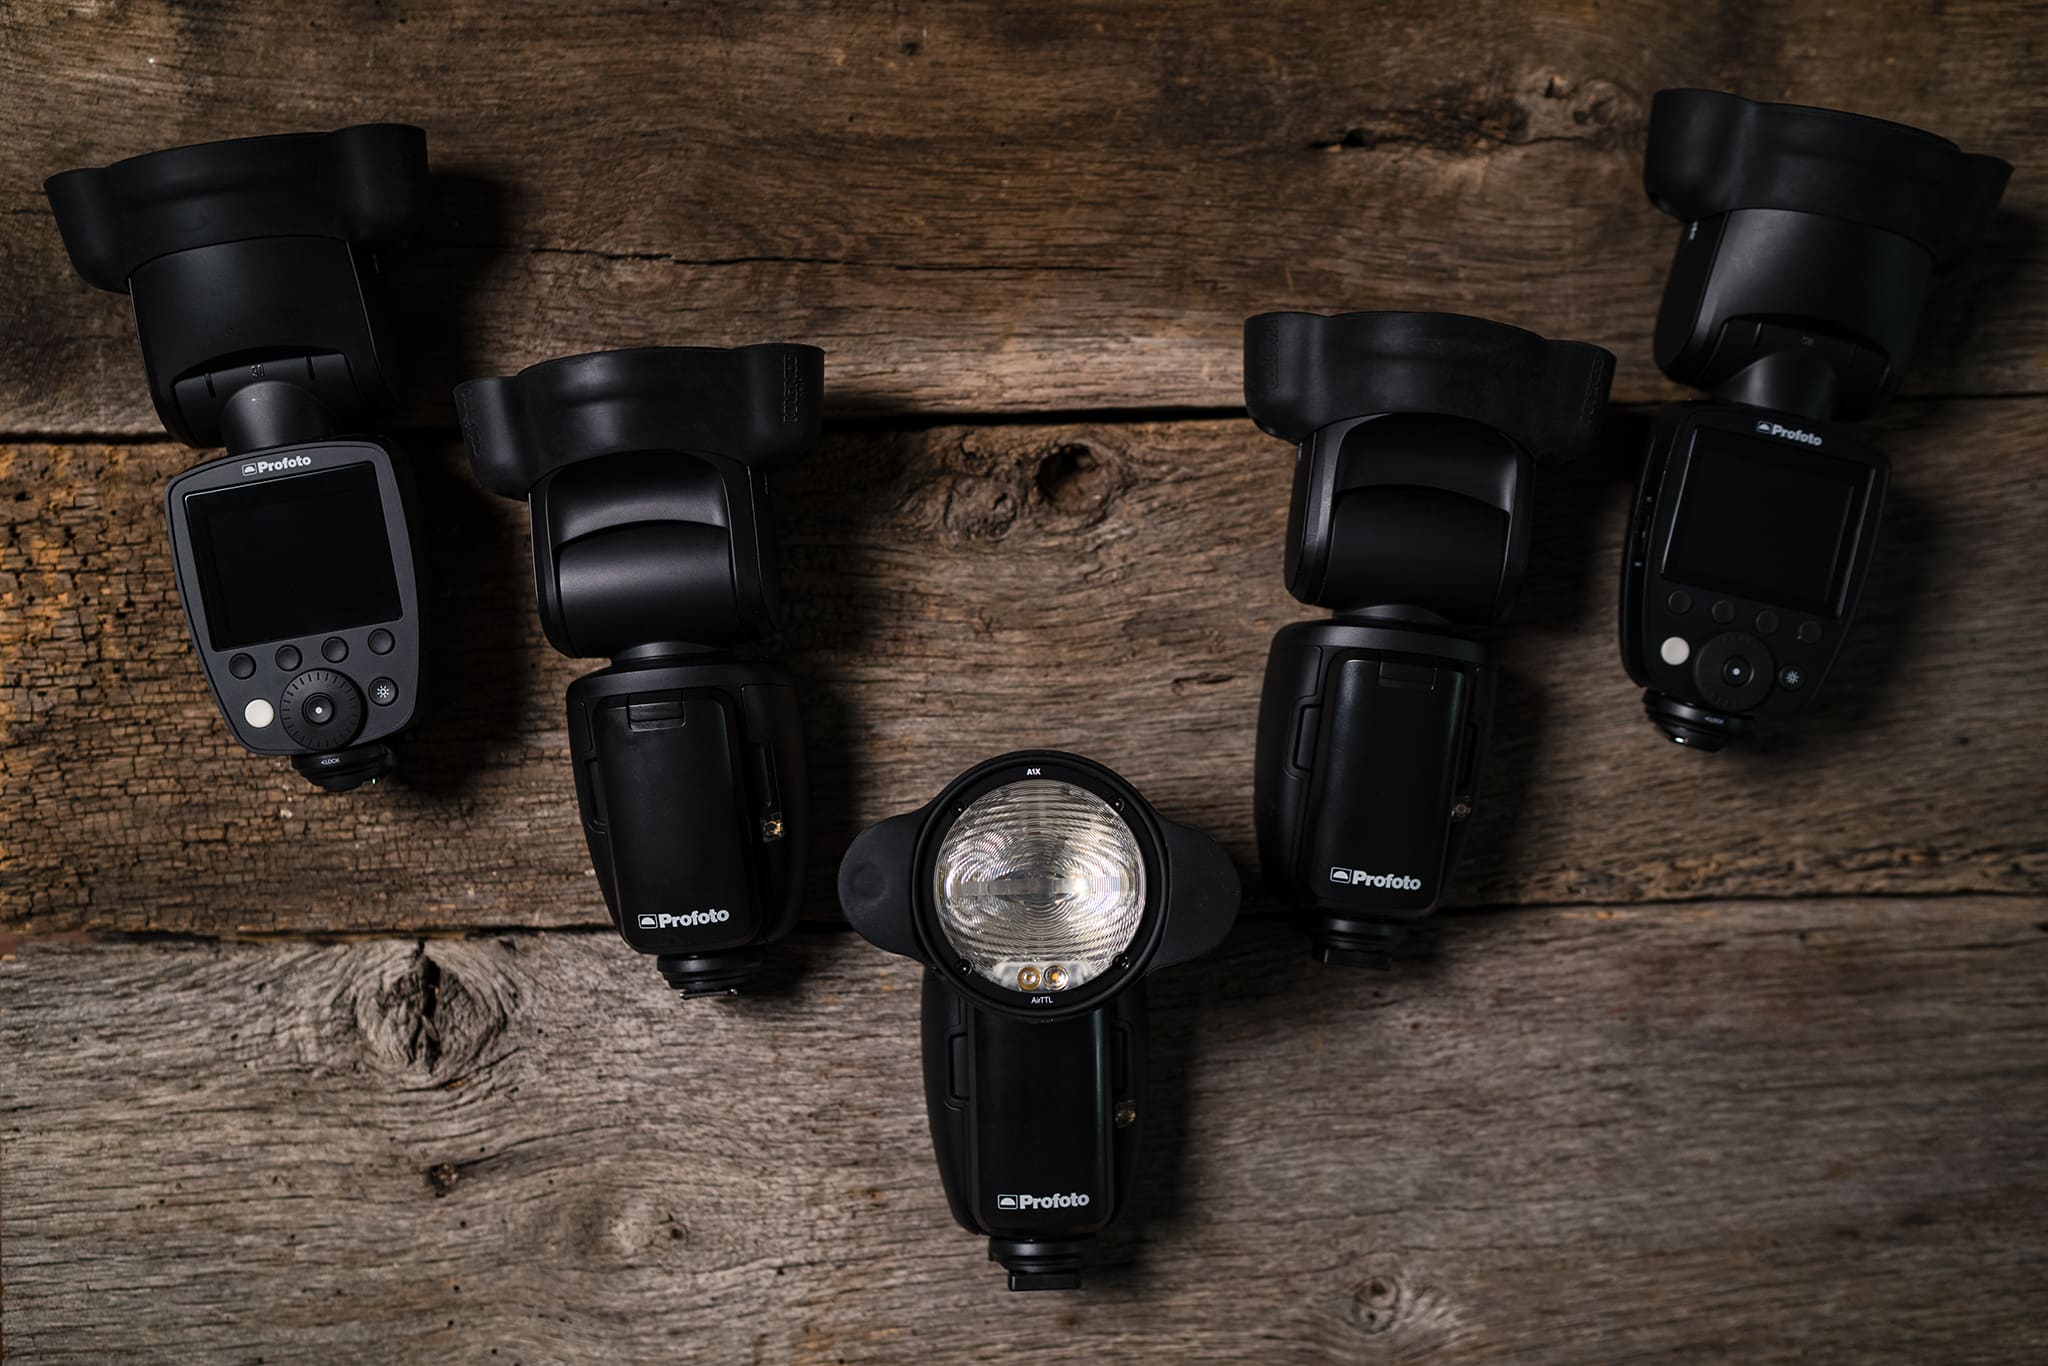 Profoto A1X: The Best Lights for A Traveling Wedding Photographer